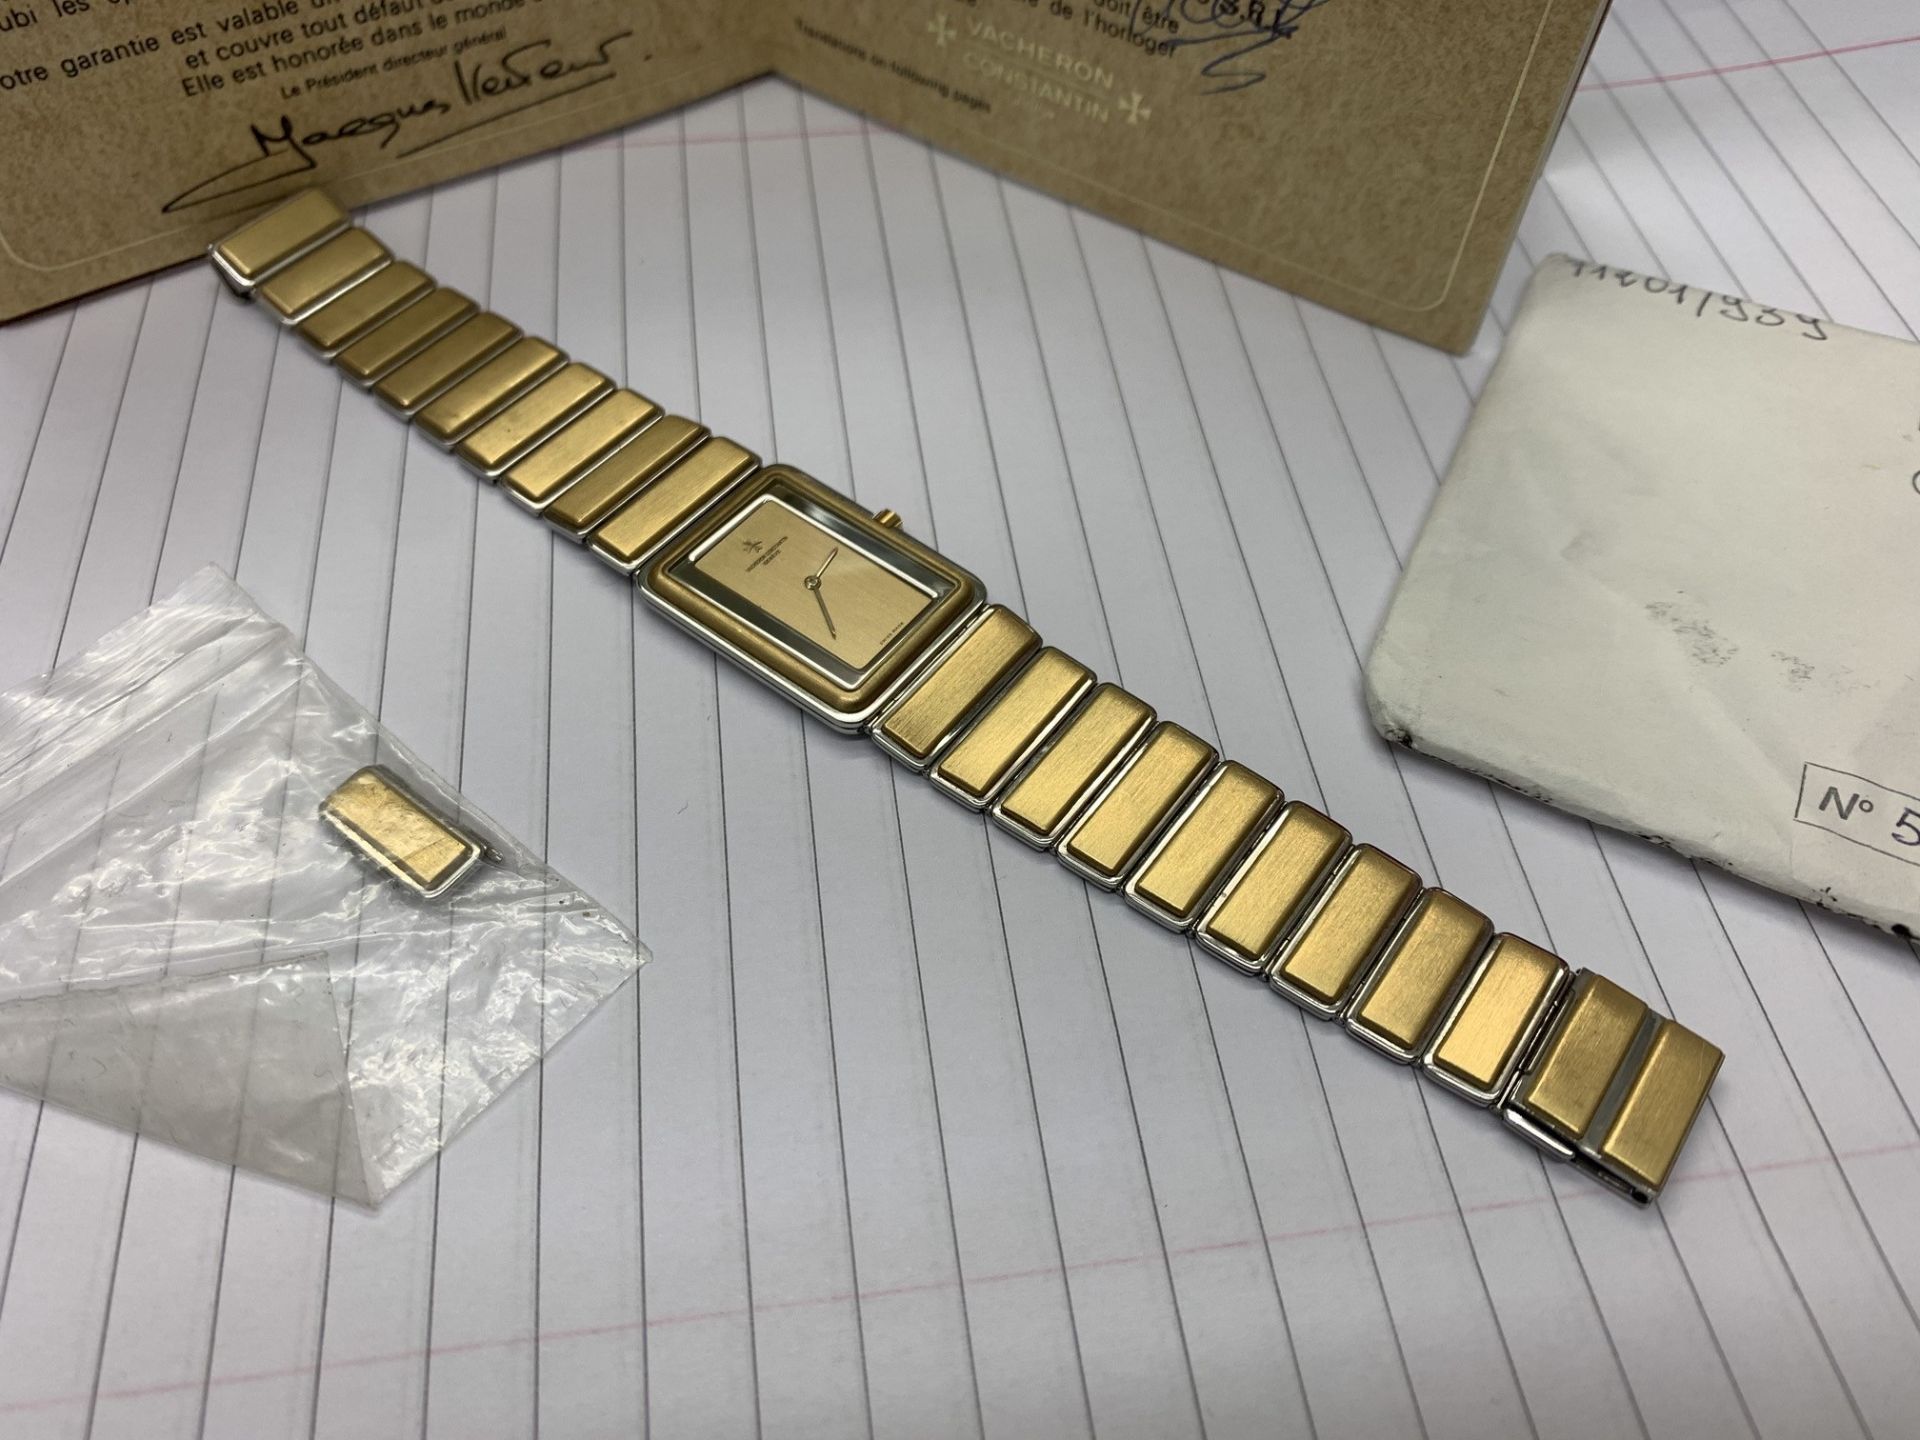 VACHERON CONSTANTIN STEEL & GOLD WATCH WITH PAPERS - Image 4 of 7